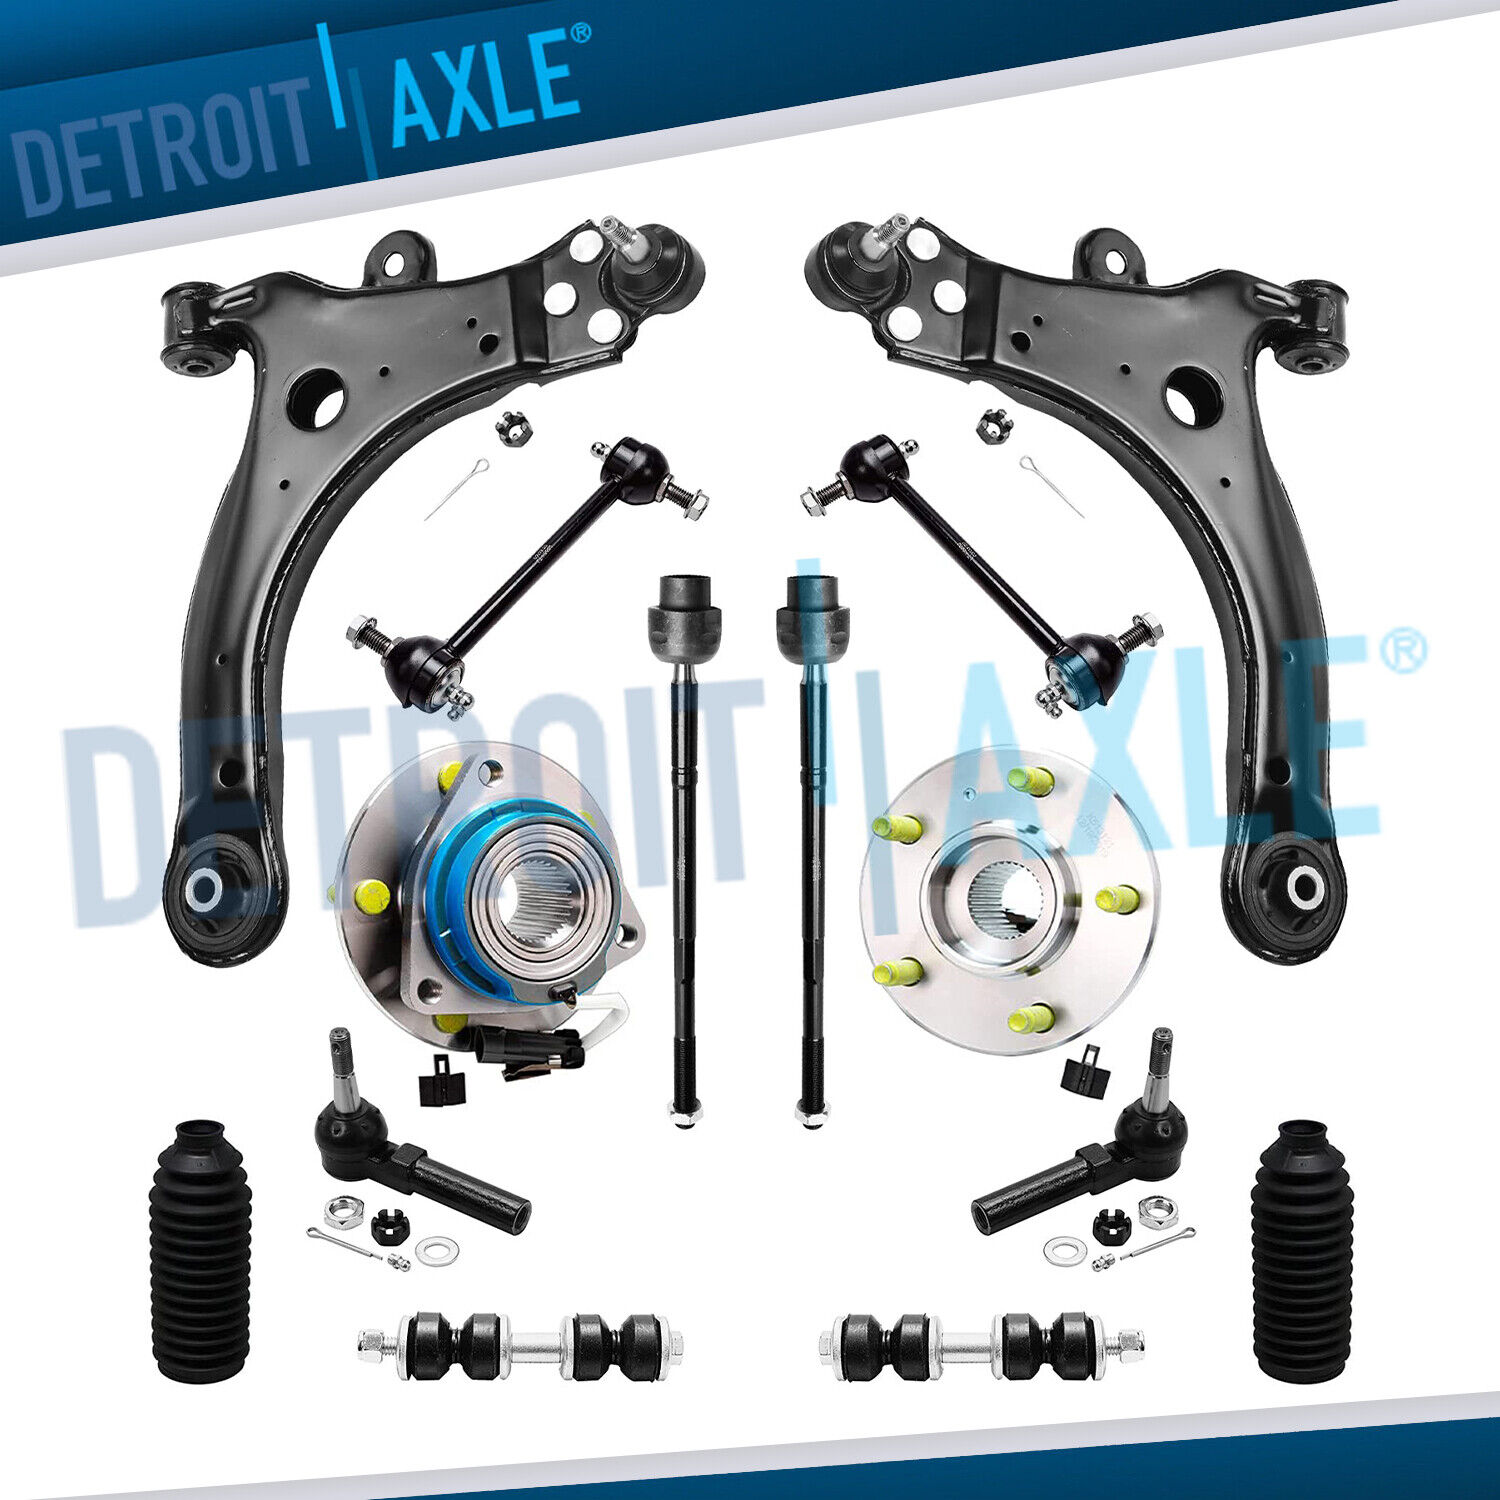 14pc Front Suspension Kit for Chevy Impala Buick LaCrosse Allure Century